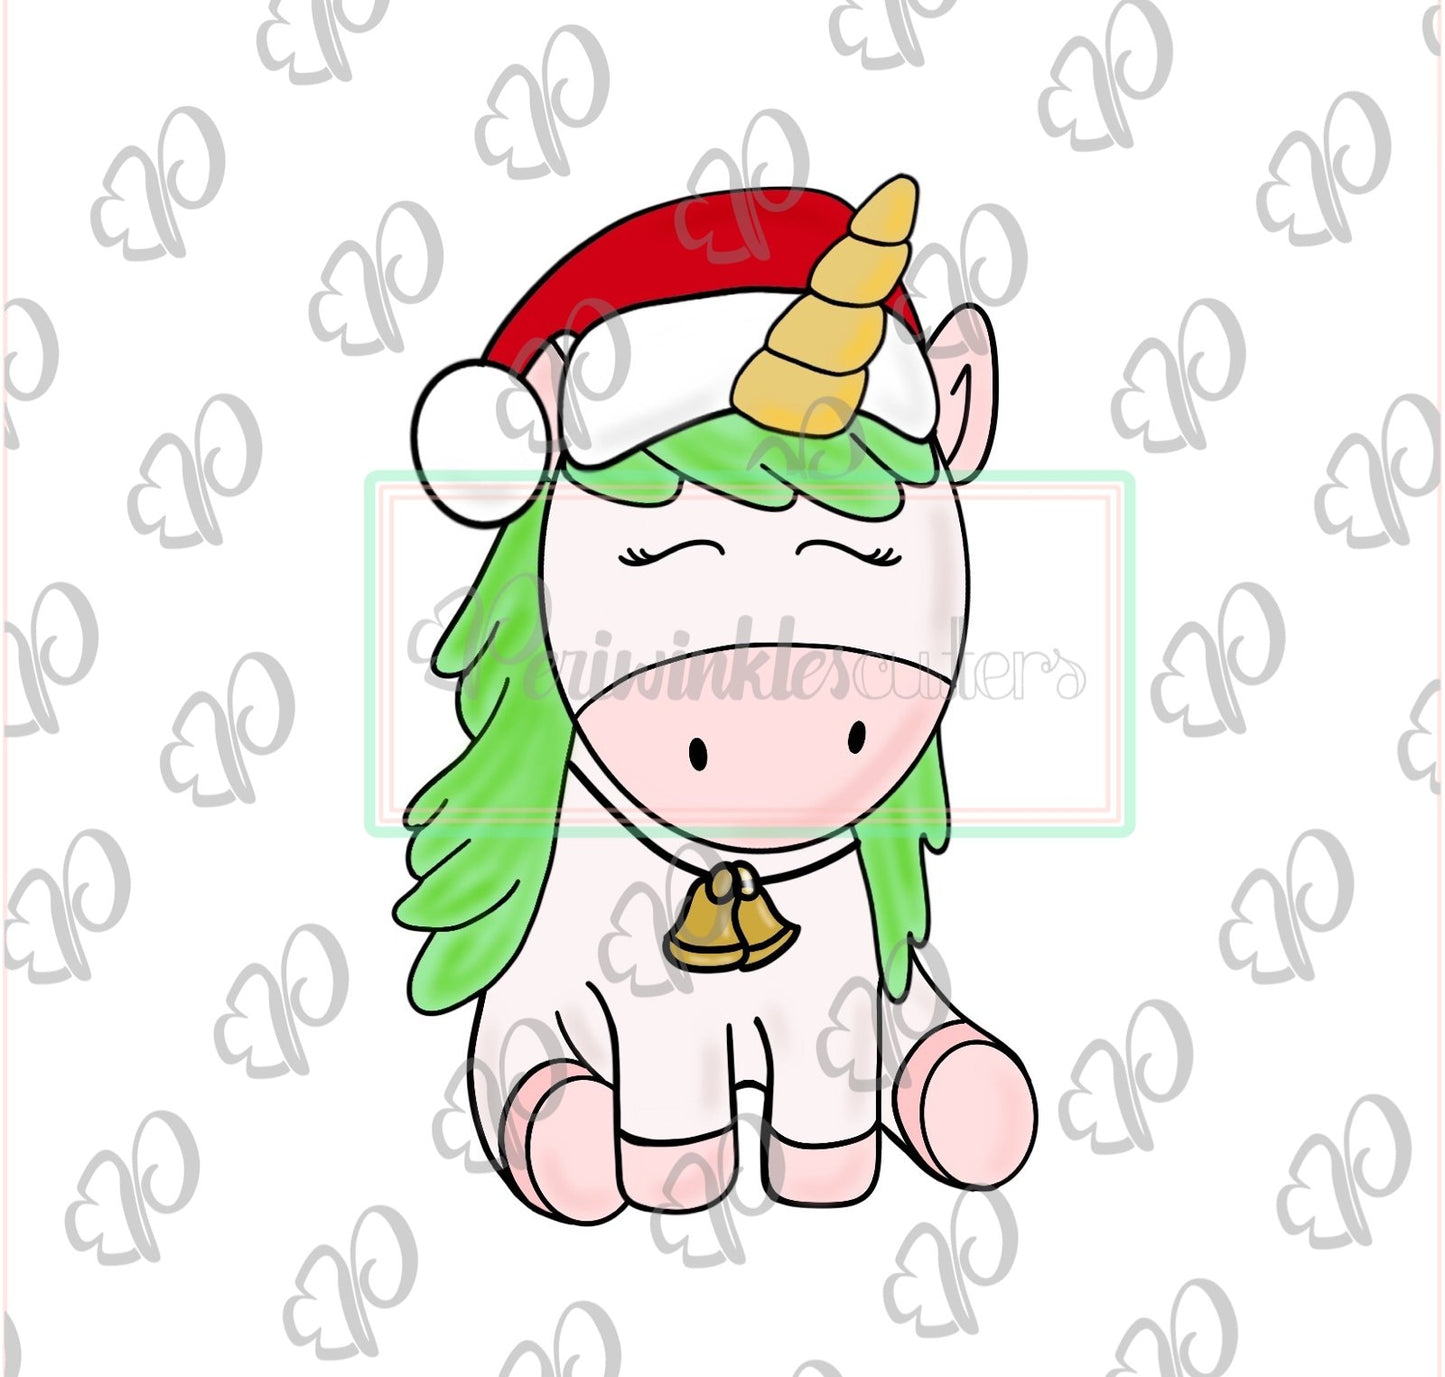 Shine Unicorn with Santa's Hat - Periwinkles Cutters